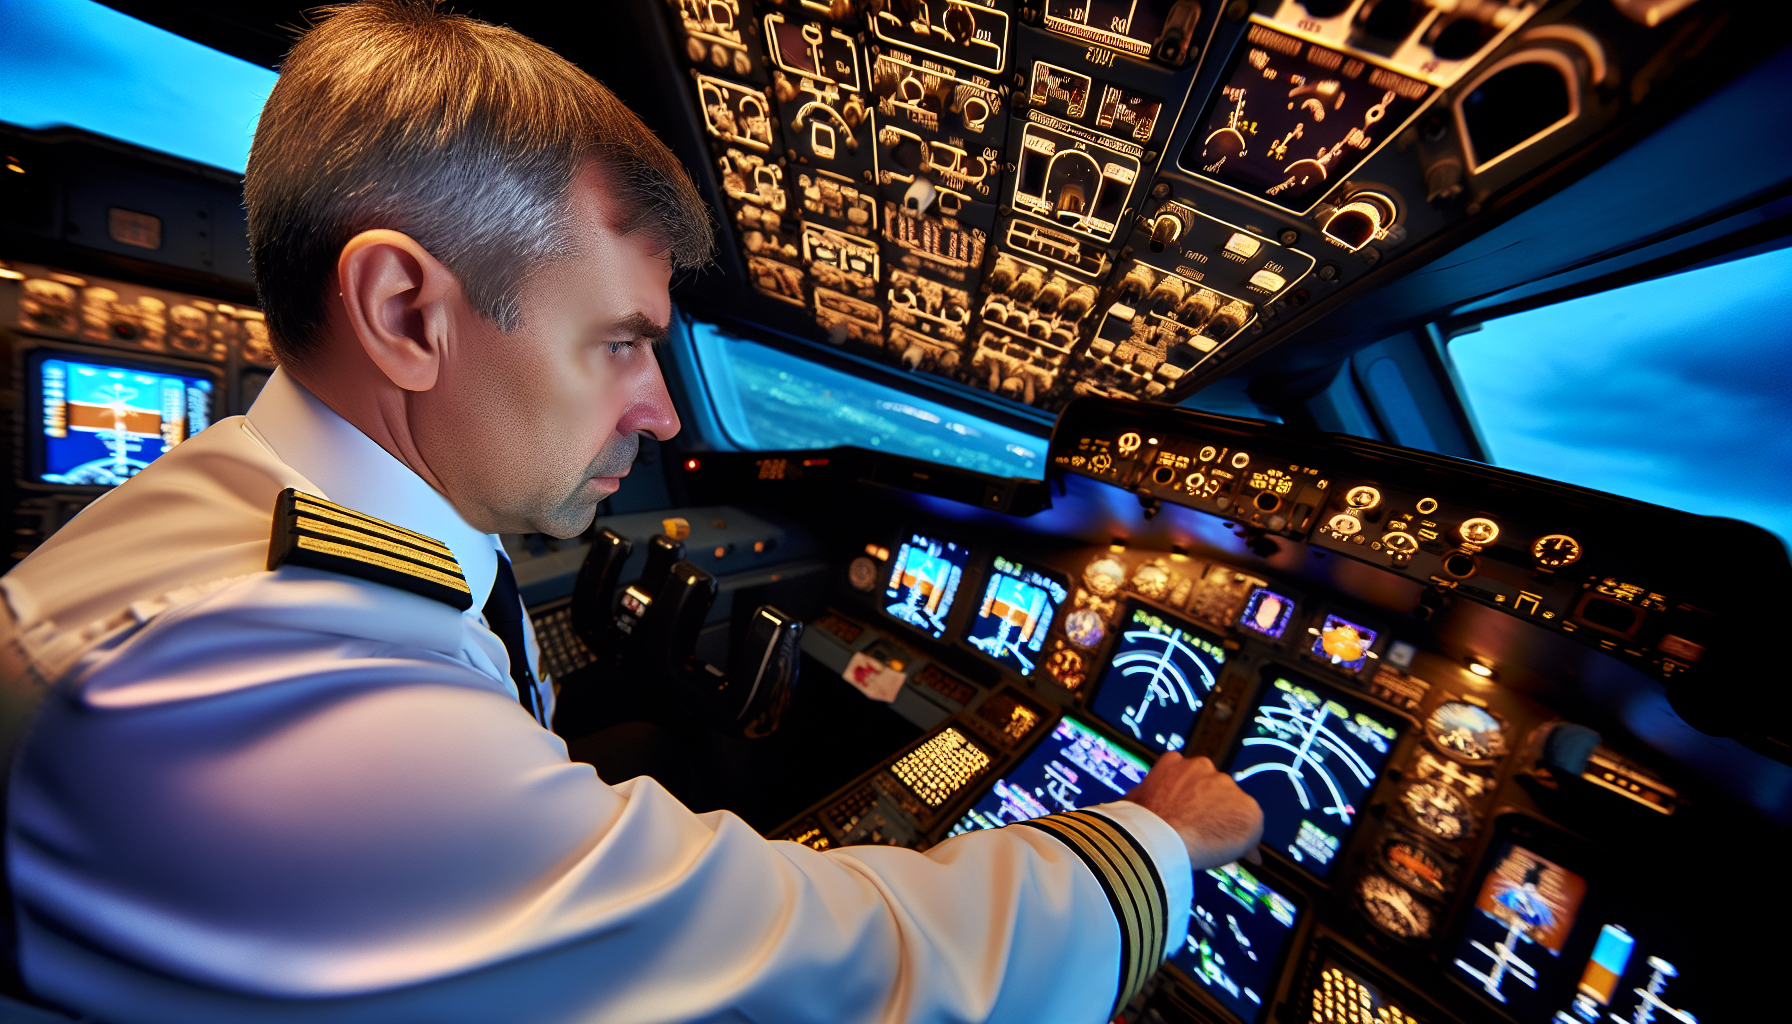 Importance of Instrument Rating in commercial pilot training